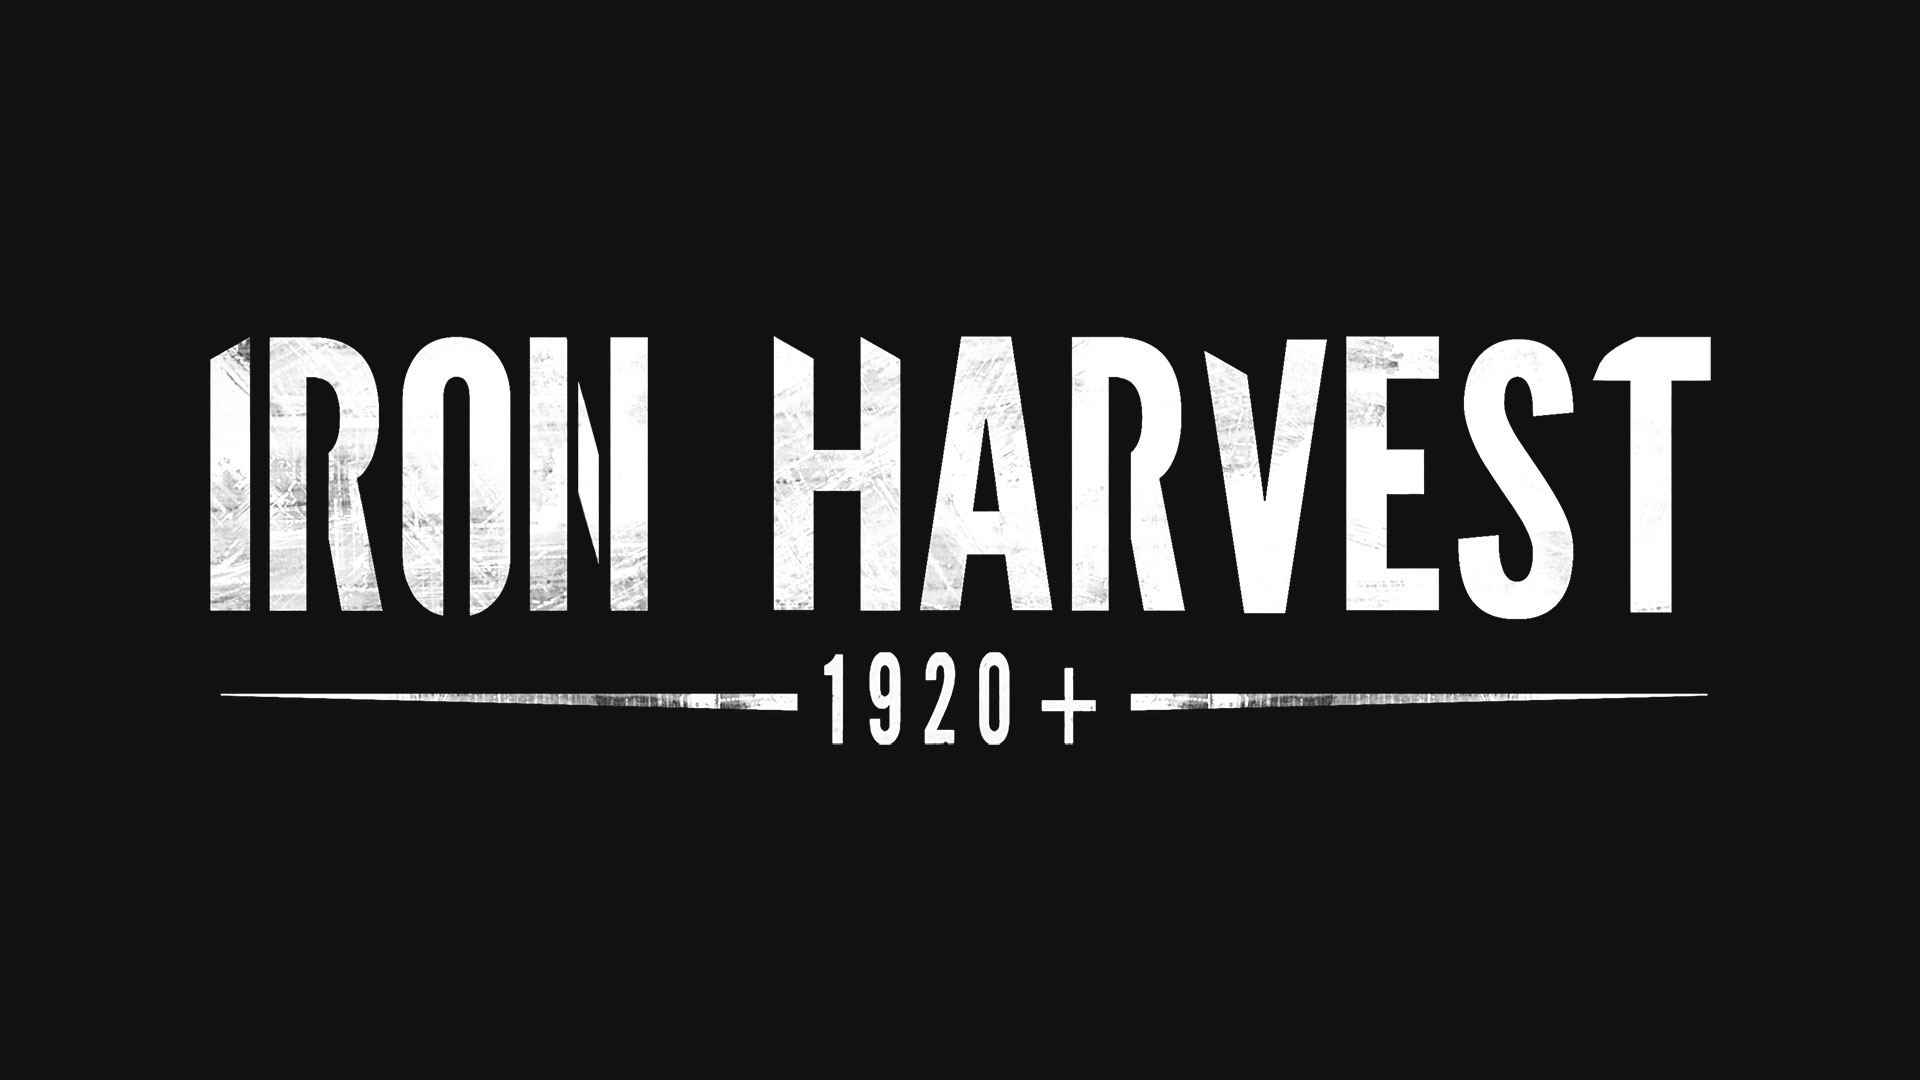 Iron Harvest 1920+ Preview